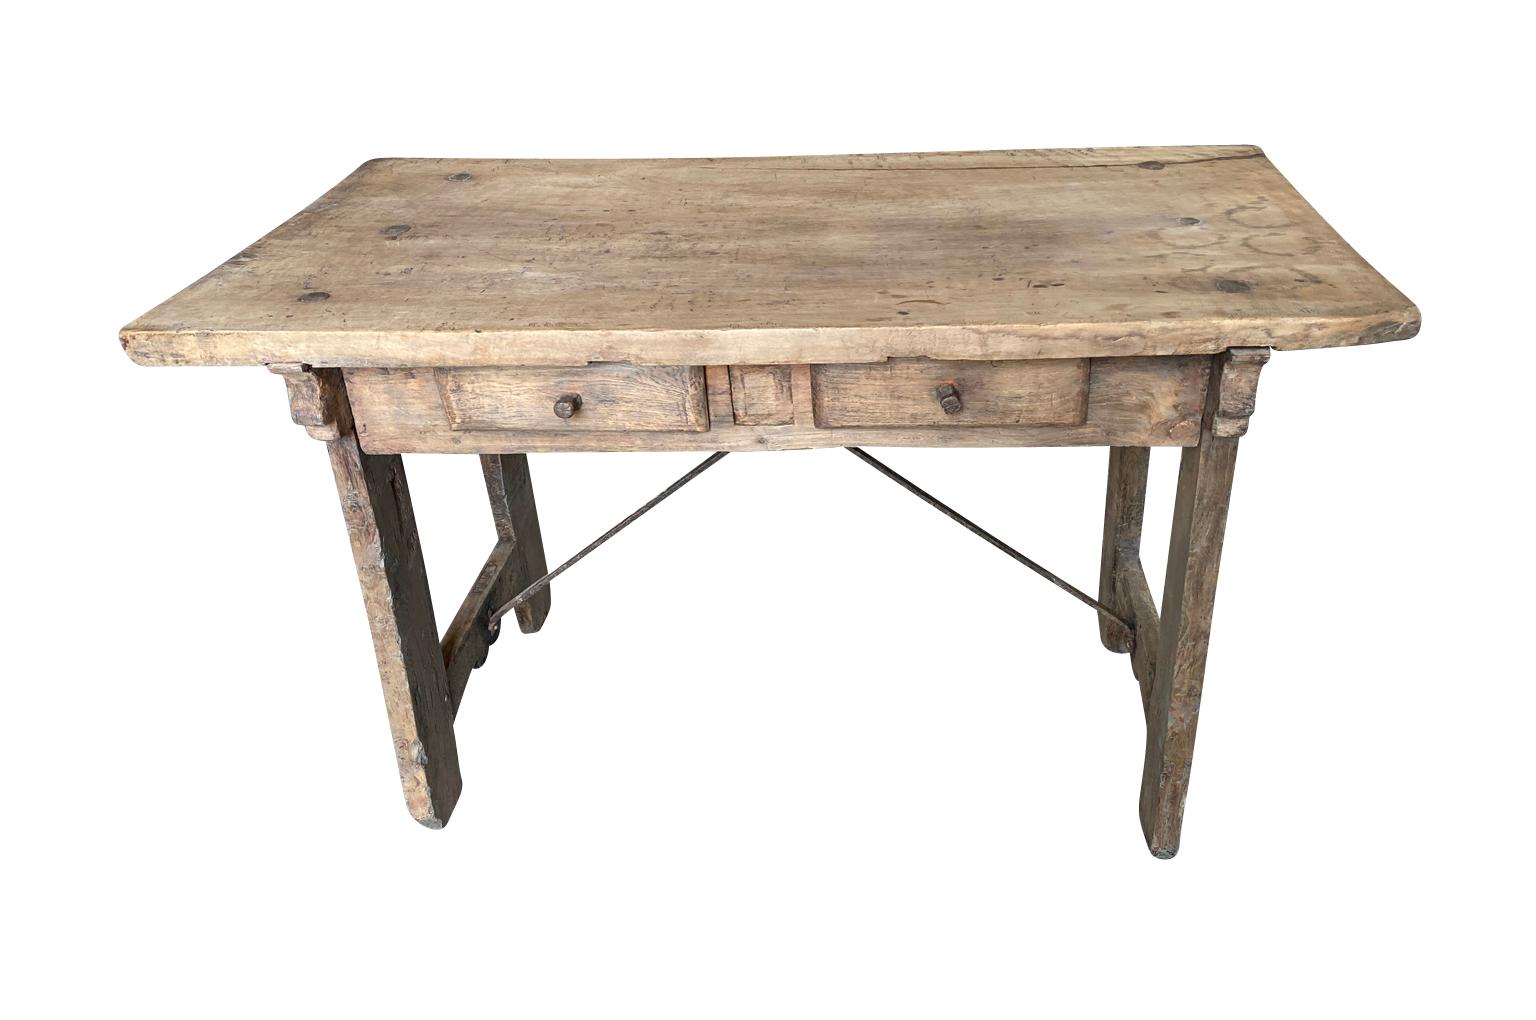 A very handsome 17th century desk - writing table from the Catalan region of Spain.  Soundly constructed from beautiful walnut and chestnut with a solid board top, 2 drawers and hand forged iron stretchers.  Wonderful patina. 